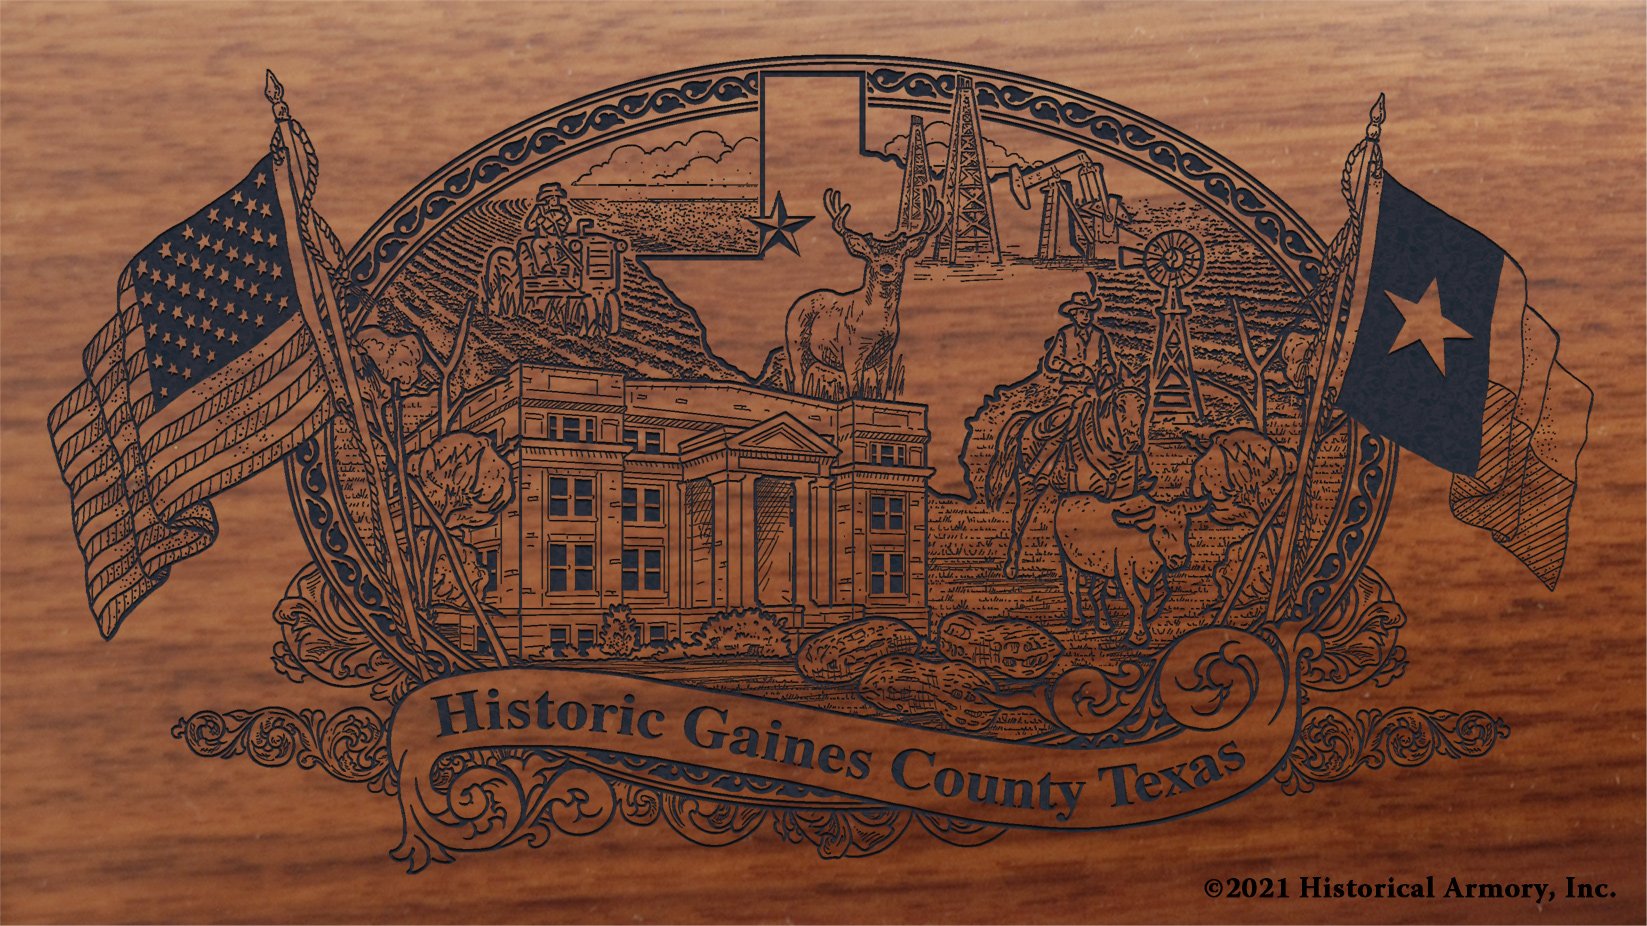 Engraved artwork | History of Gaines County Texas | Historical Armory